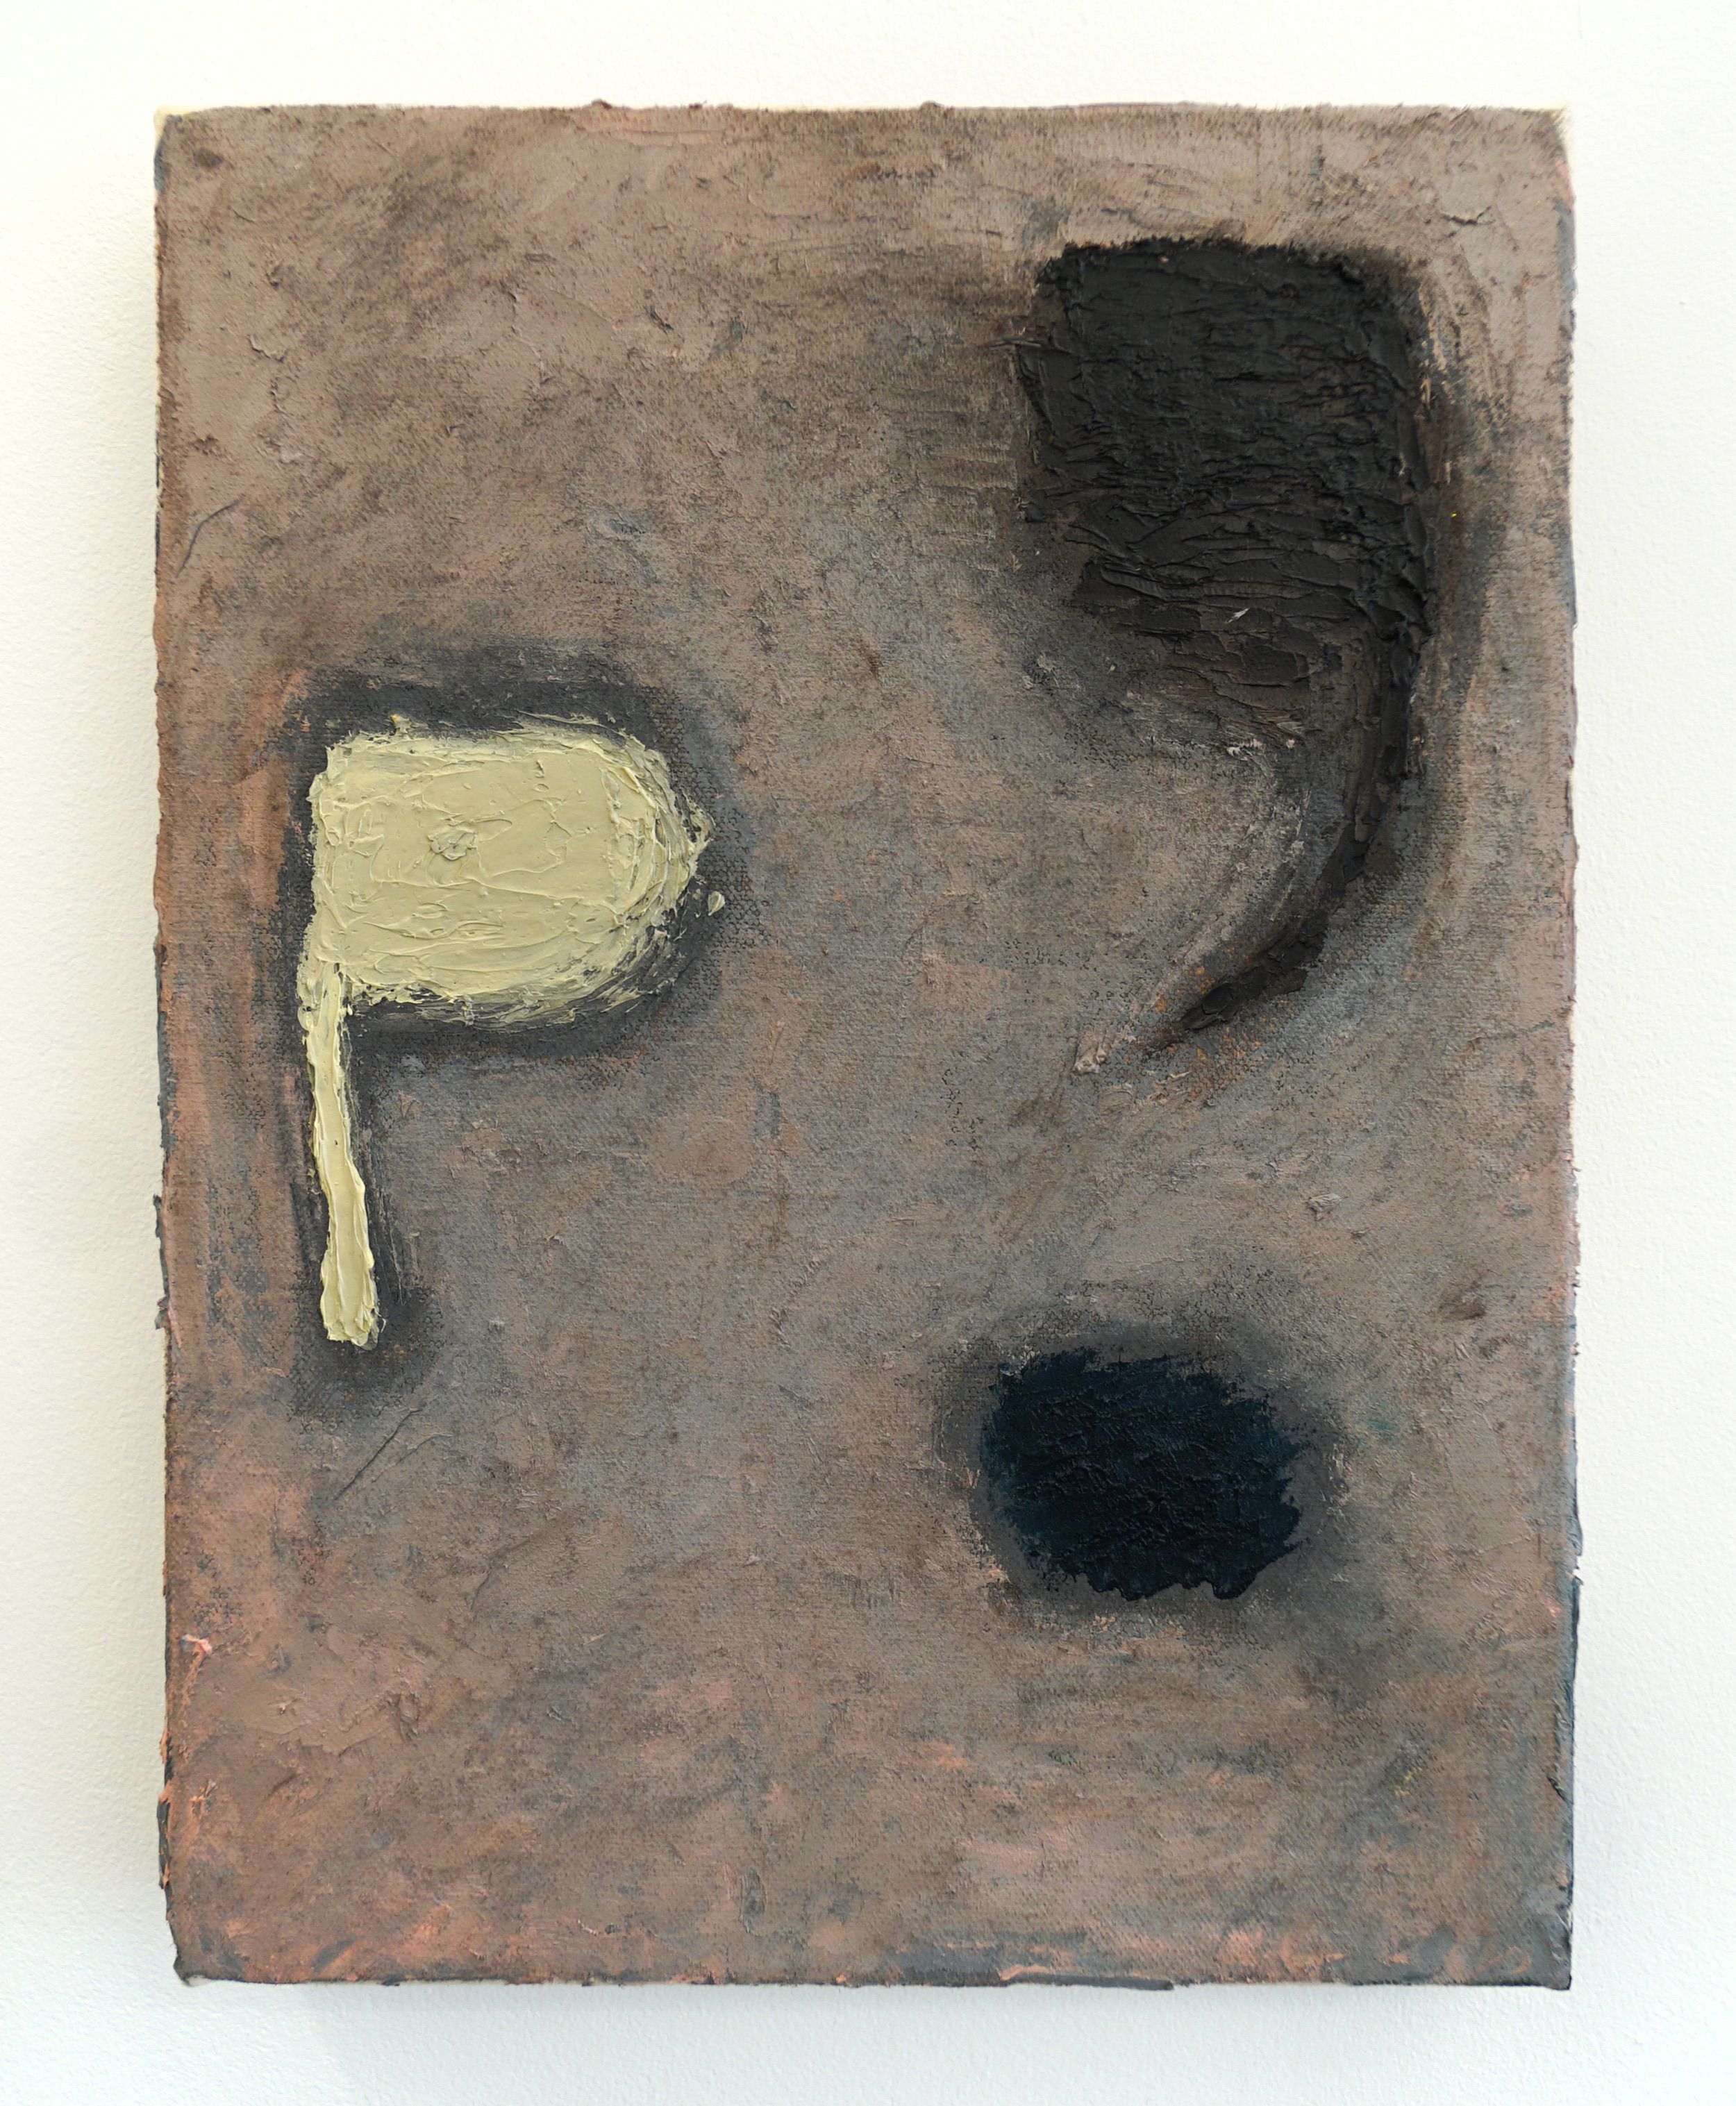  Keith J. Varadi  Palsy Paragraph , 2013-2019 Oil and canvas 12 x 9 inches 